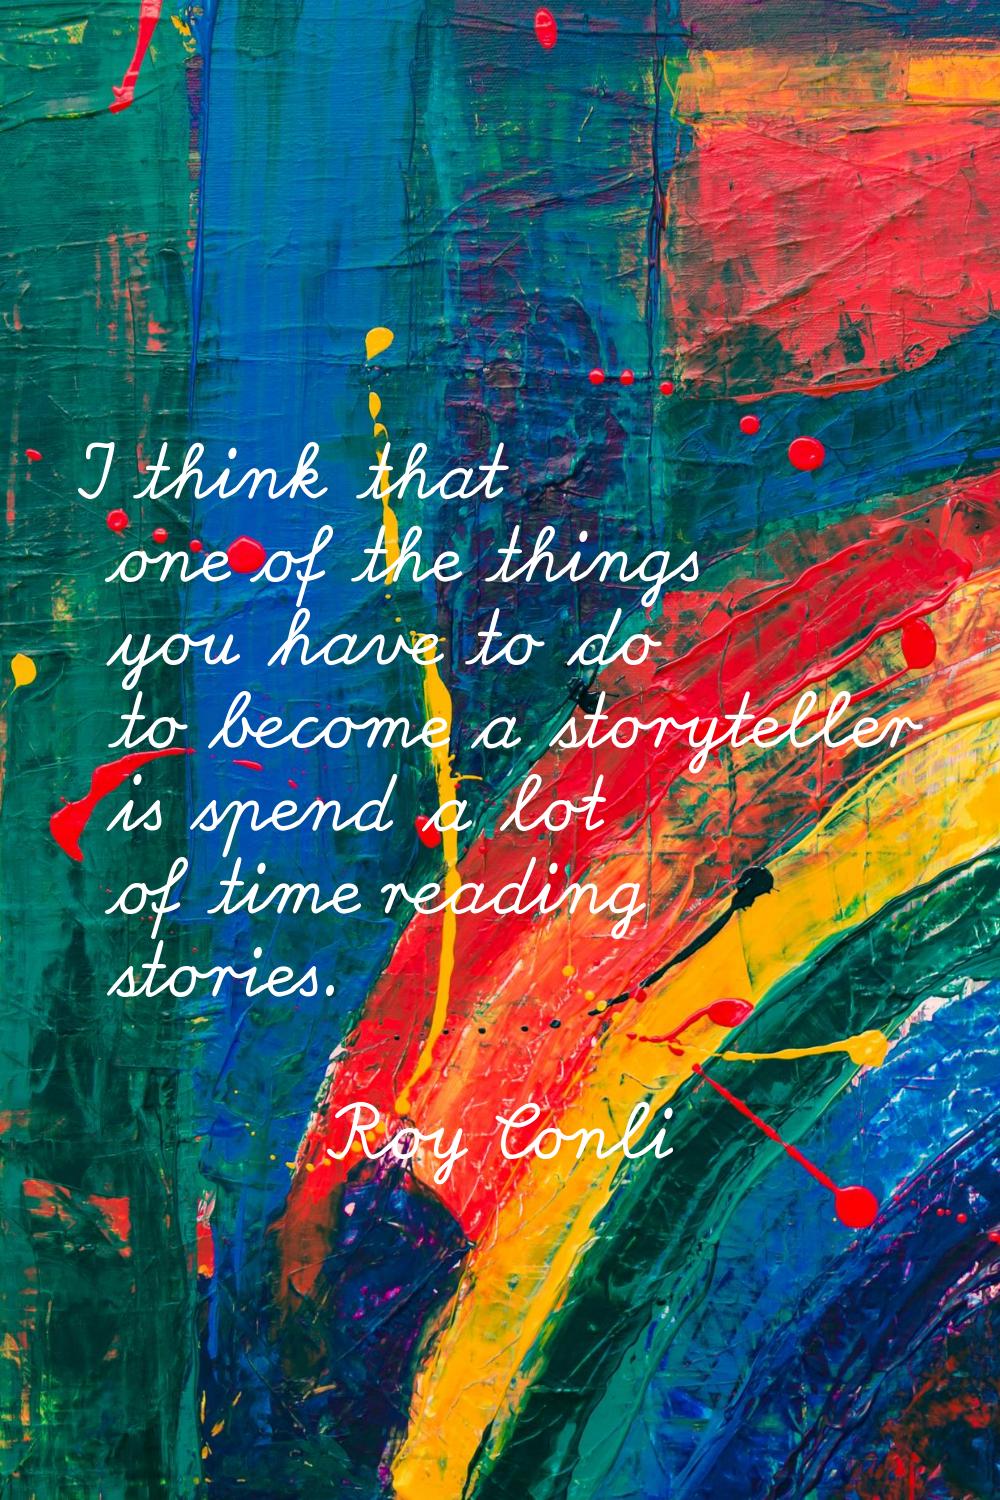 I think that one of the things you have to do to become a storyteller is spend a lot of time readin